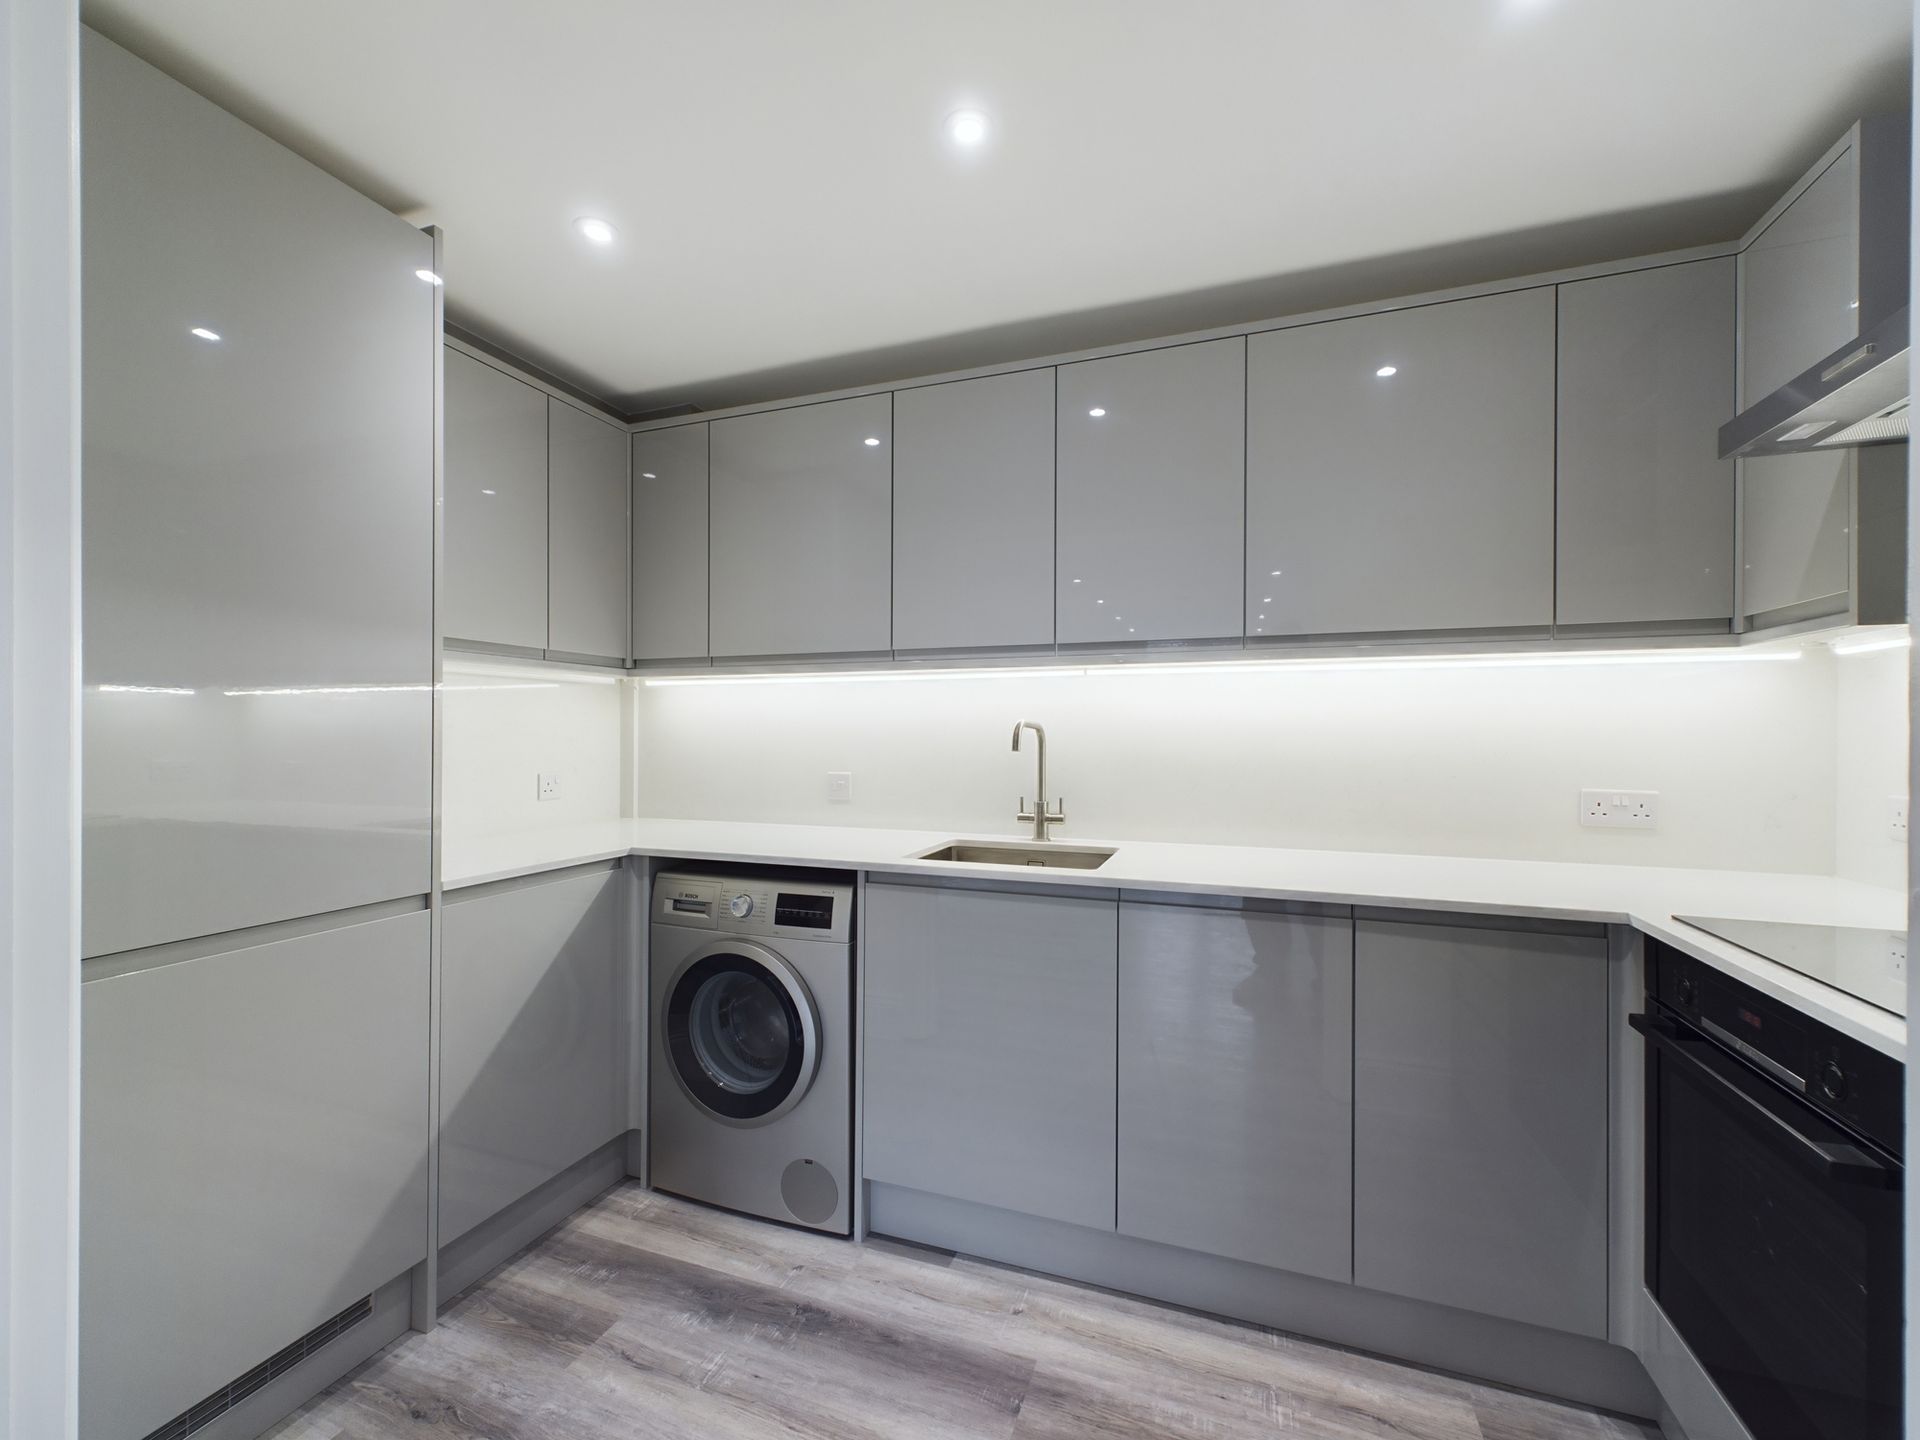 2 bed flat to rent reading refurbished kitchen